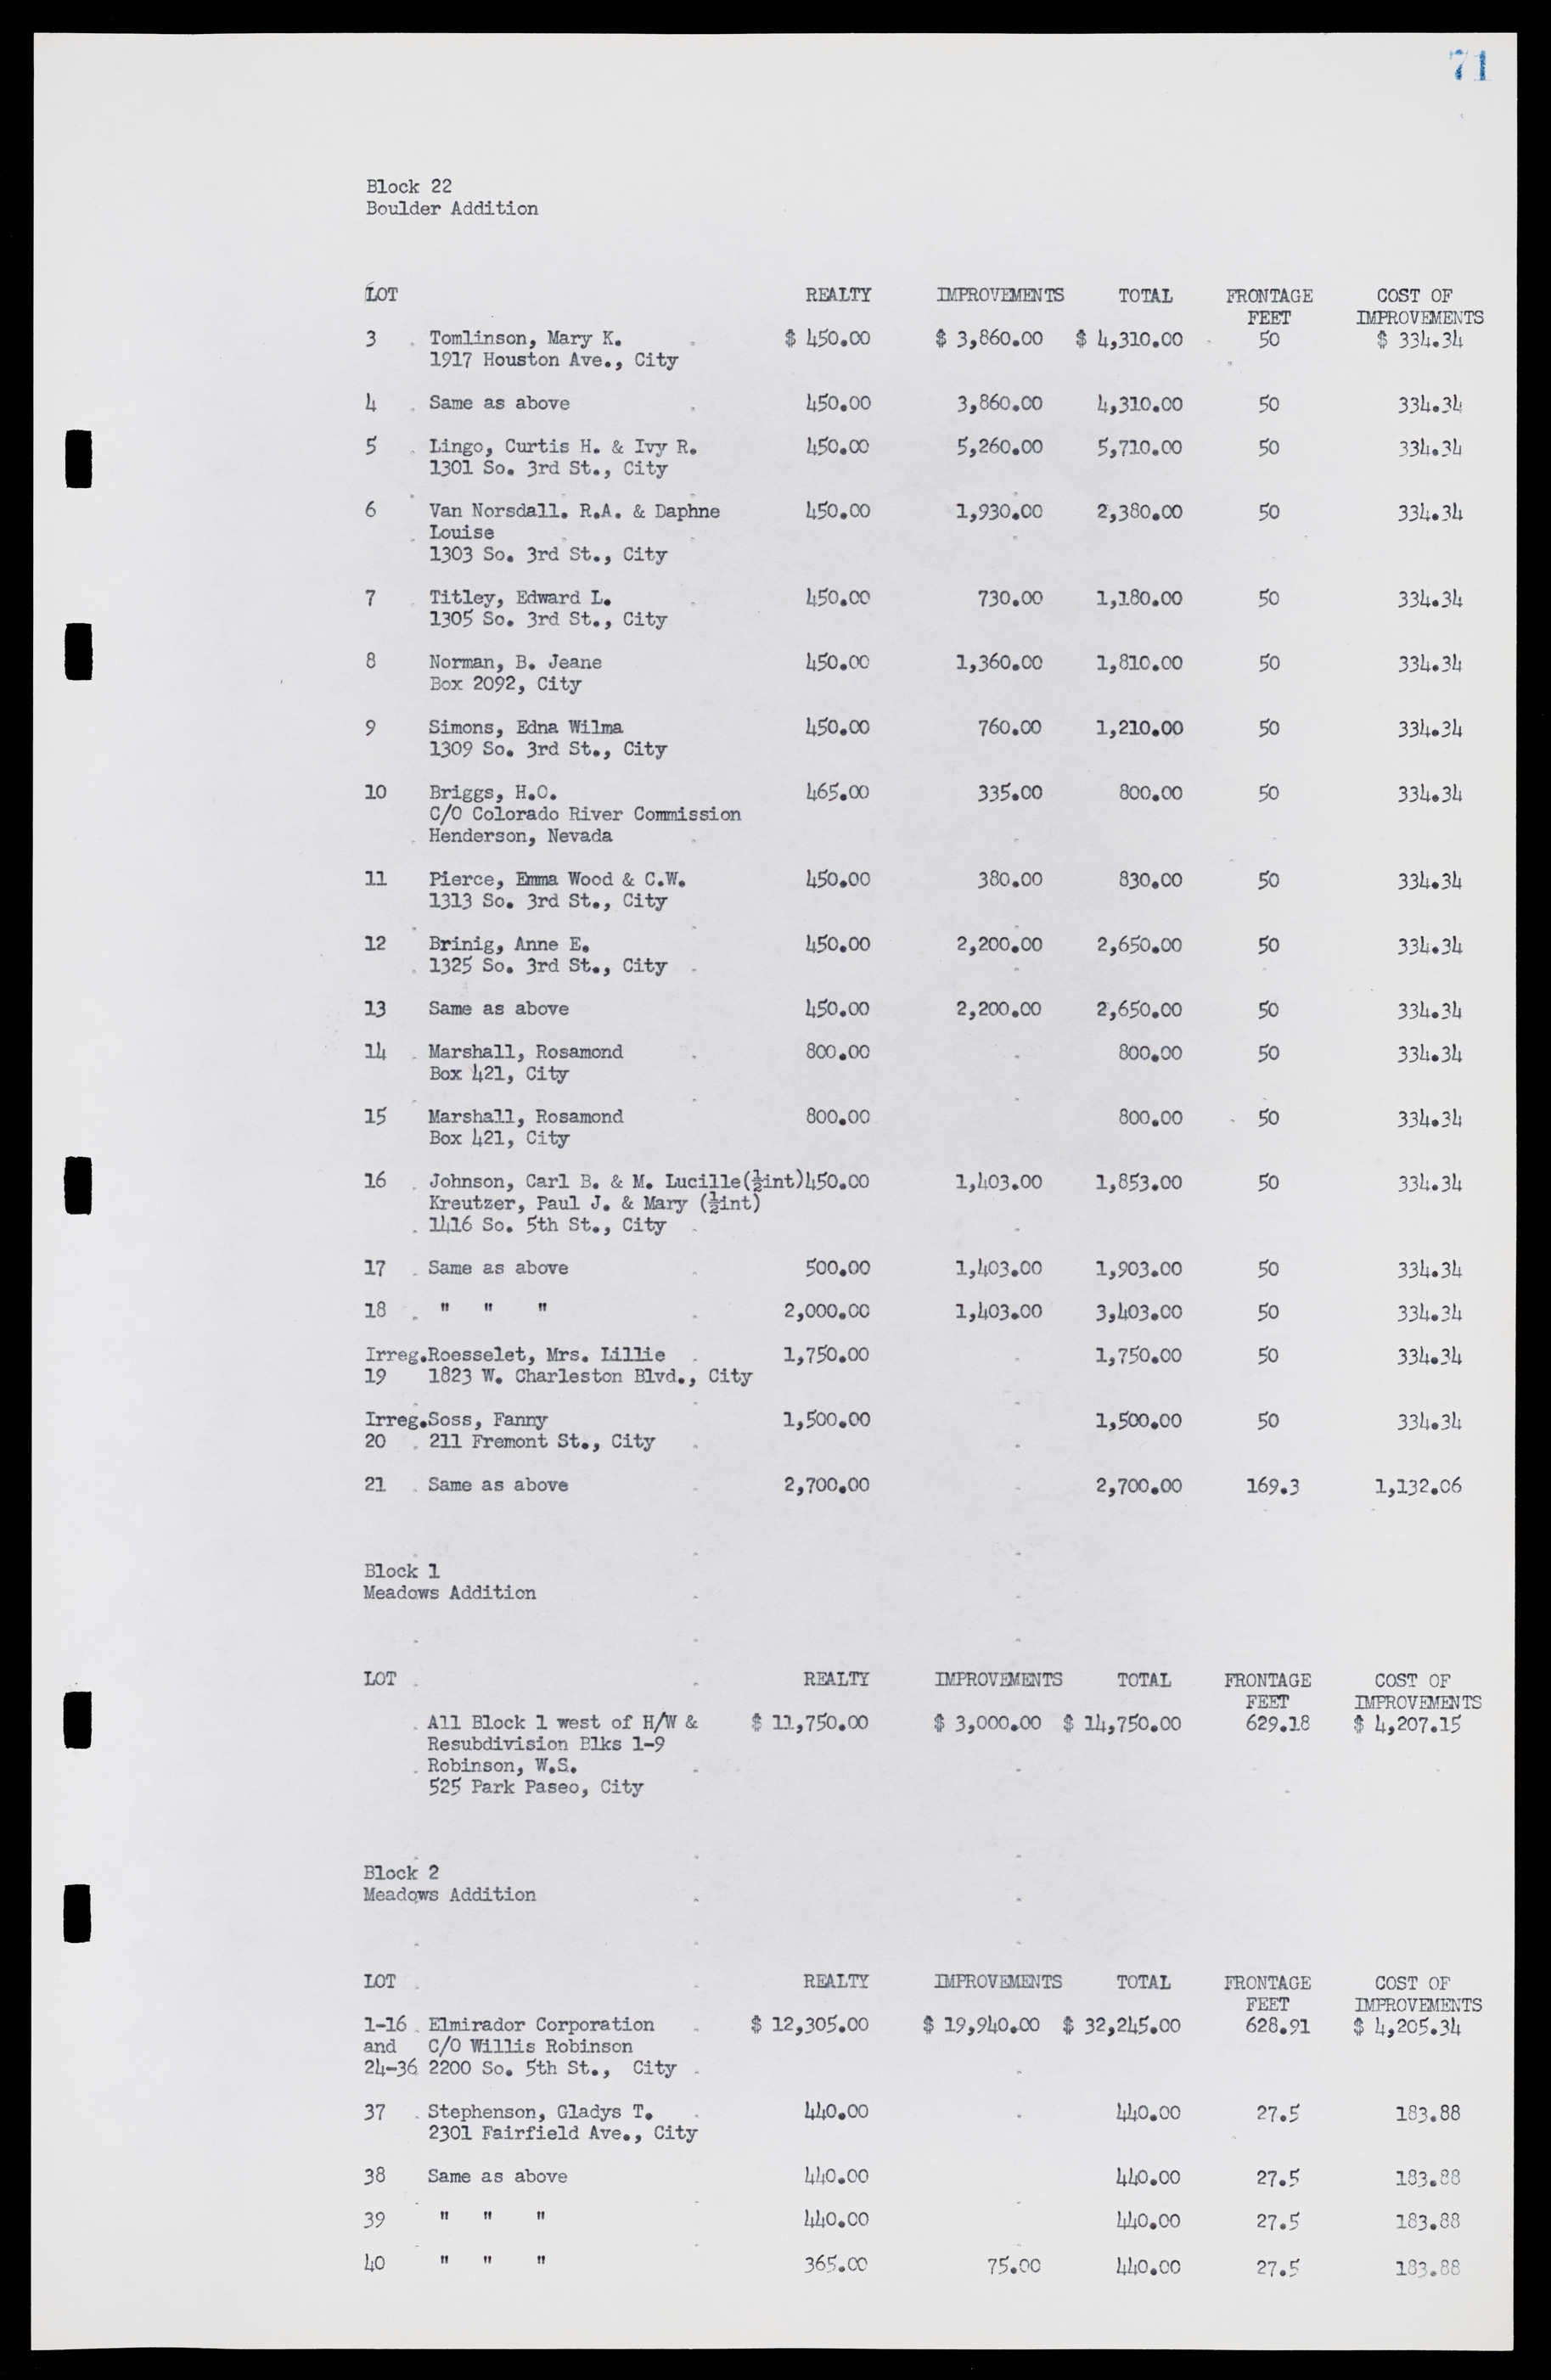 Las Vegas City Commission Minutes, May 26, 1952 to February 17, 1954, lvc000008-75